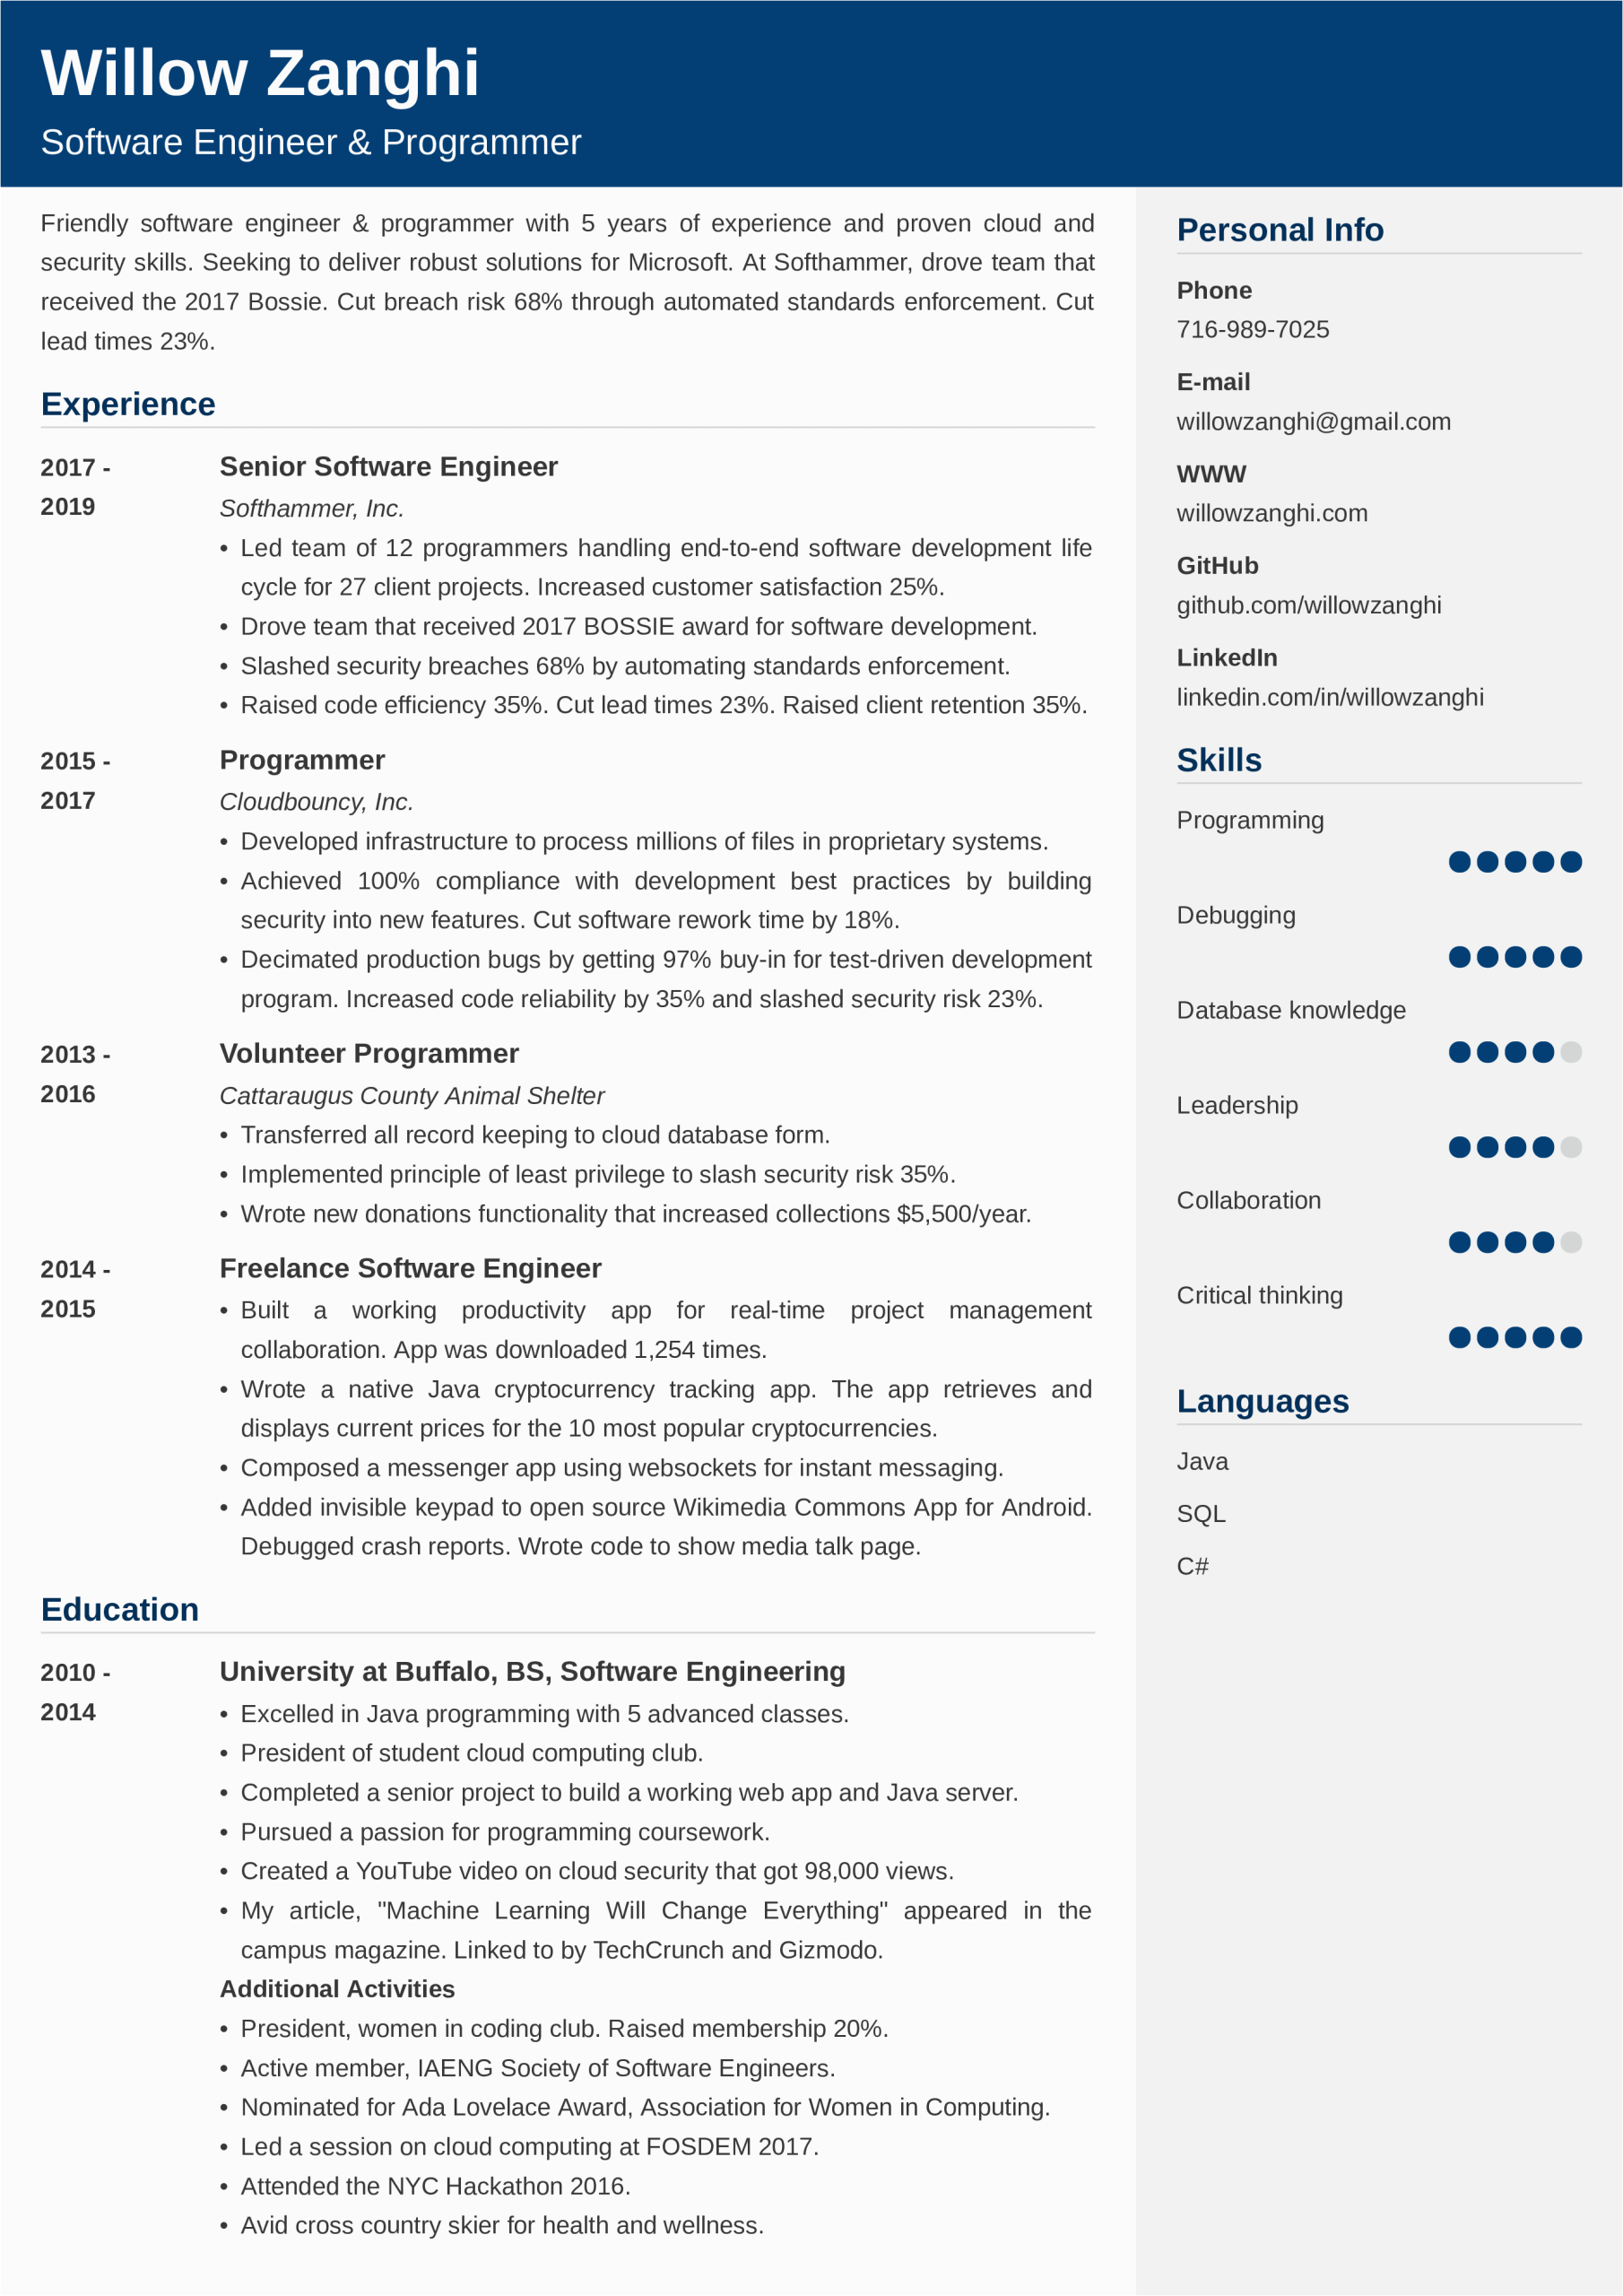 Experience Resume Samples for software Engineer software Engineer Resume Template